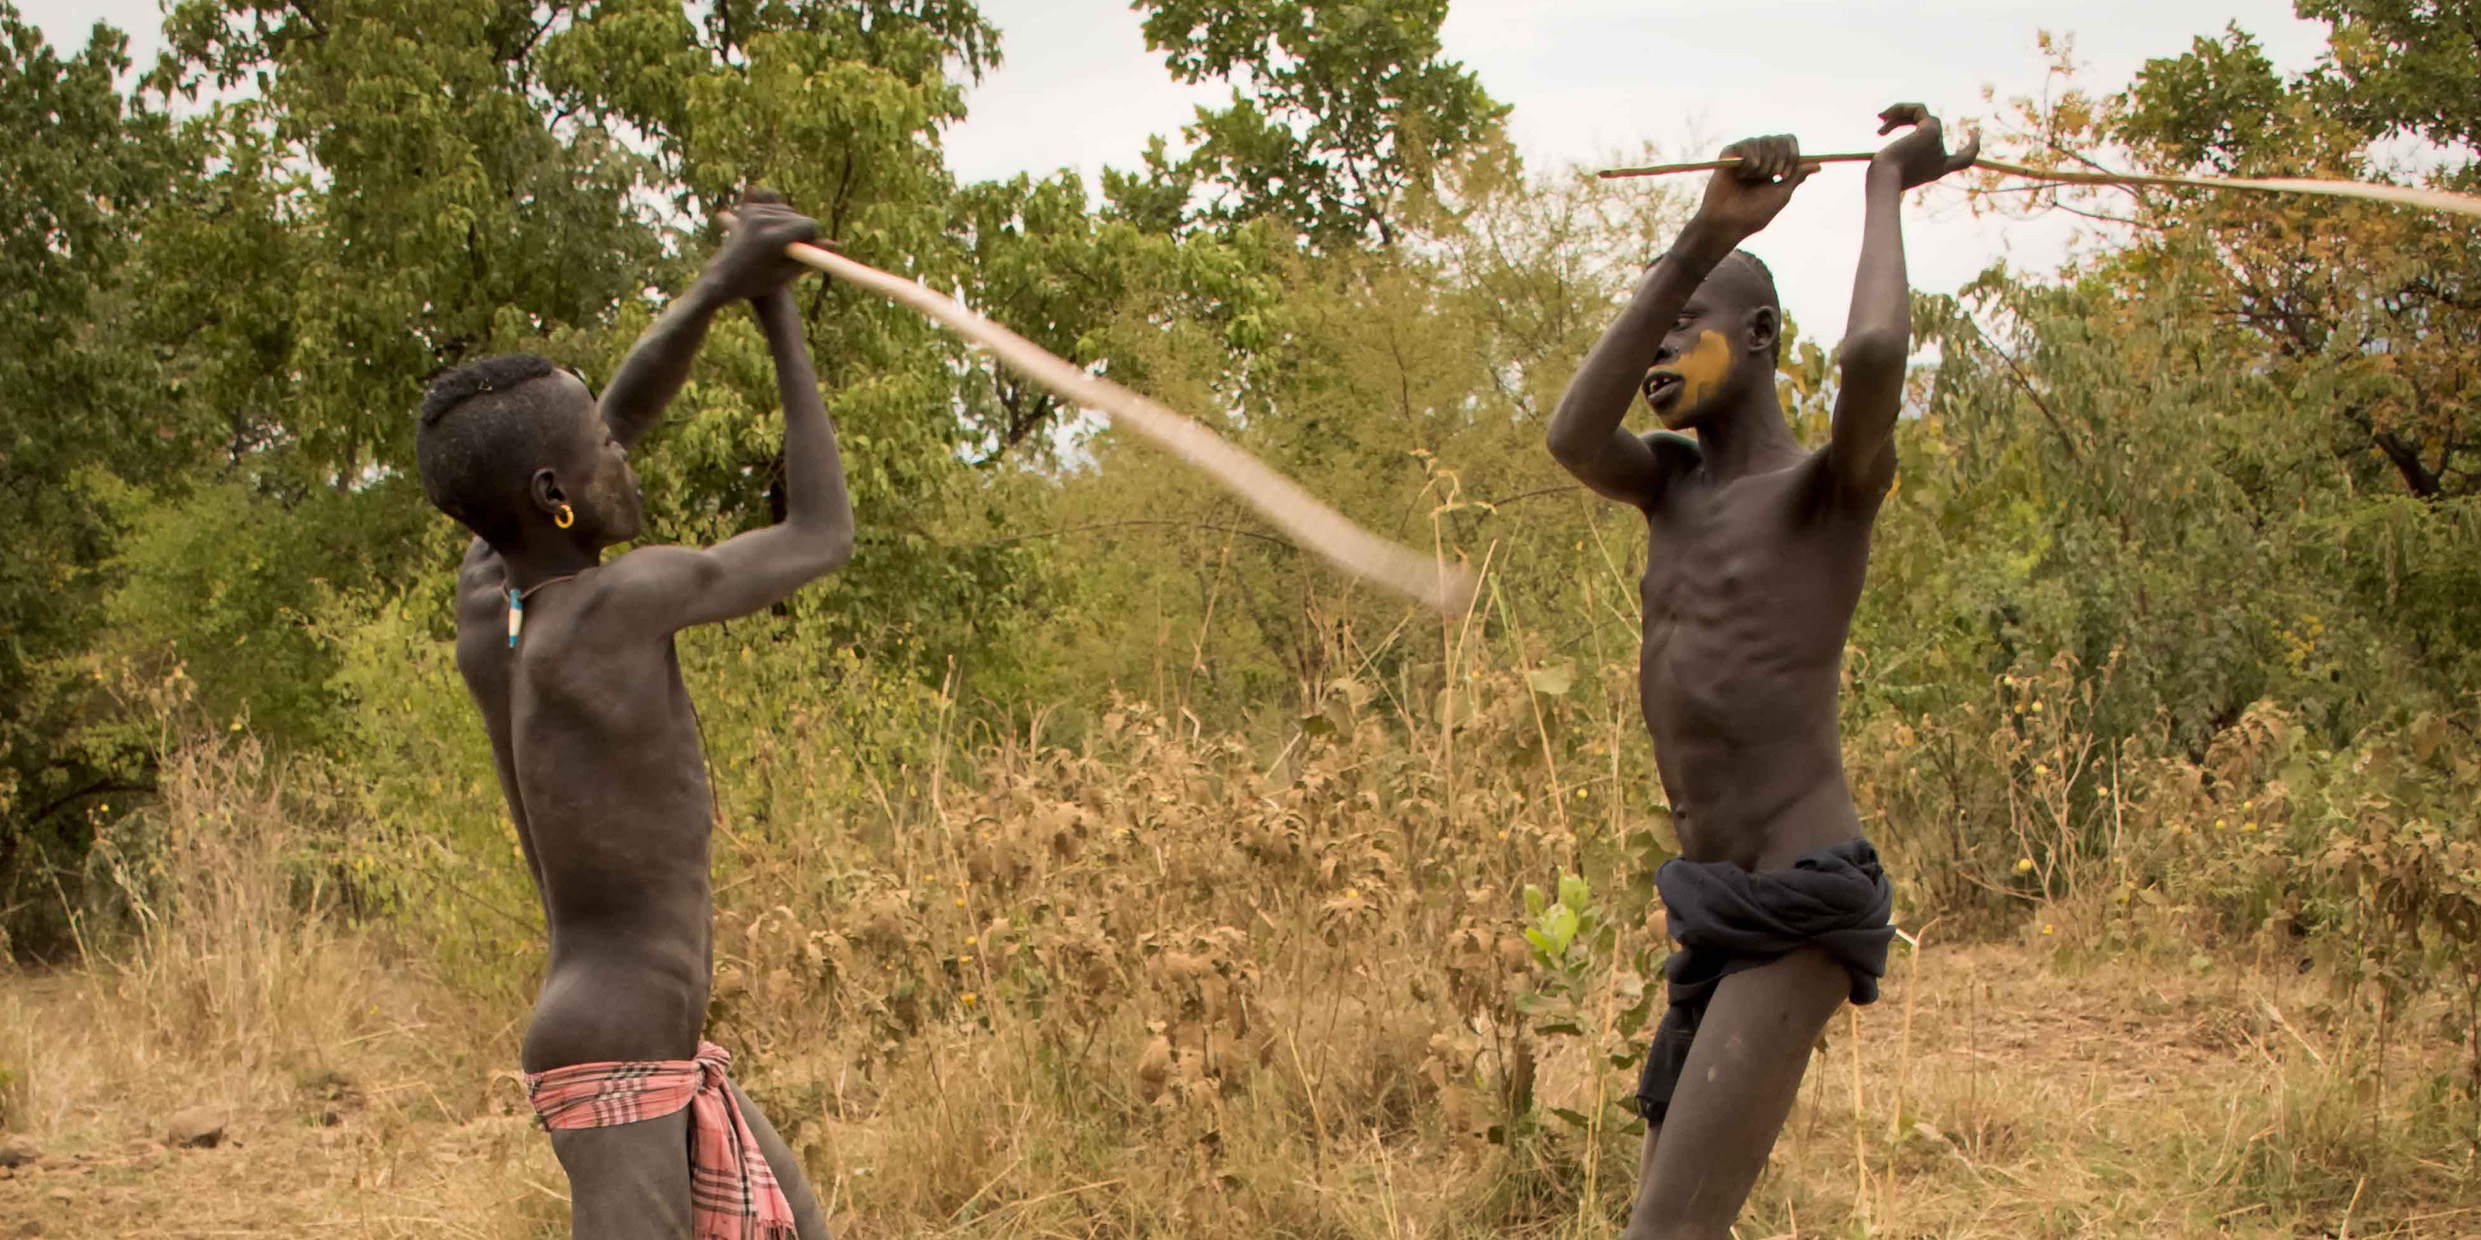 Image of two young men fighting with long thin sticks